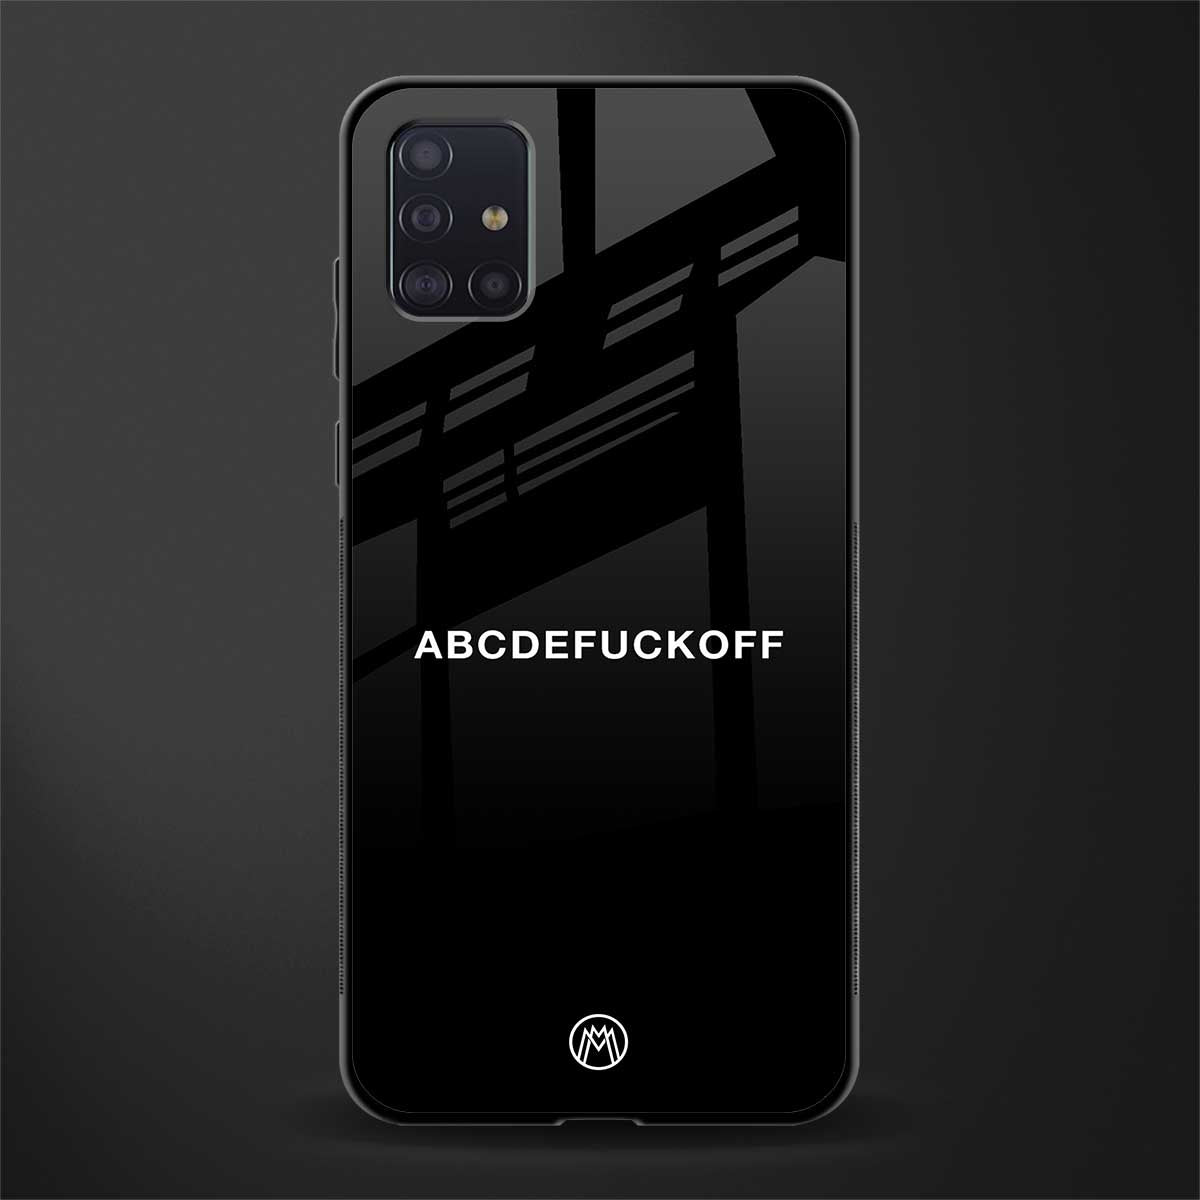 abcdefuckoff glass case for samsung galaxy a71 image